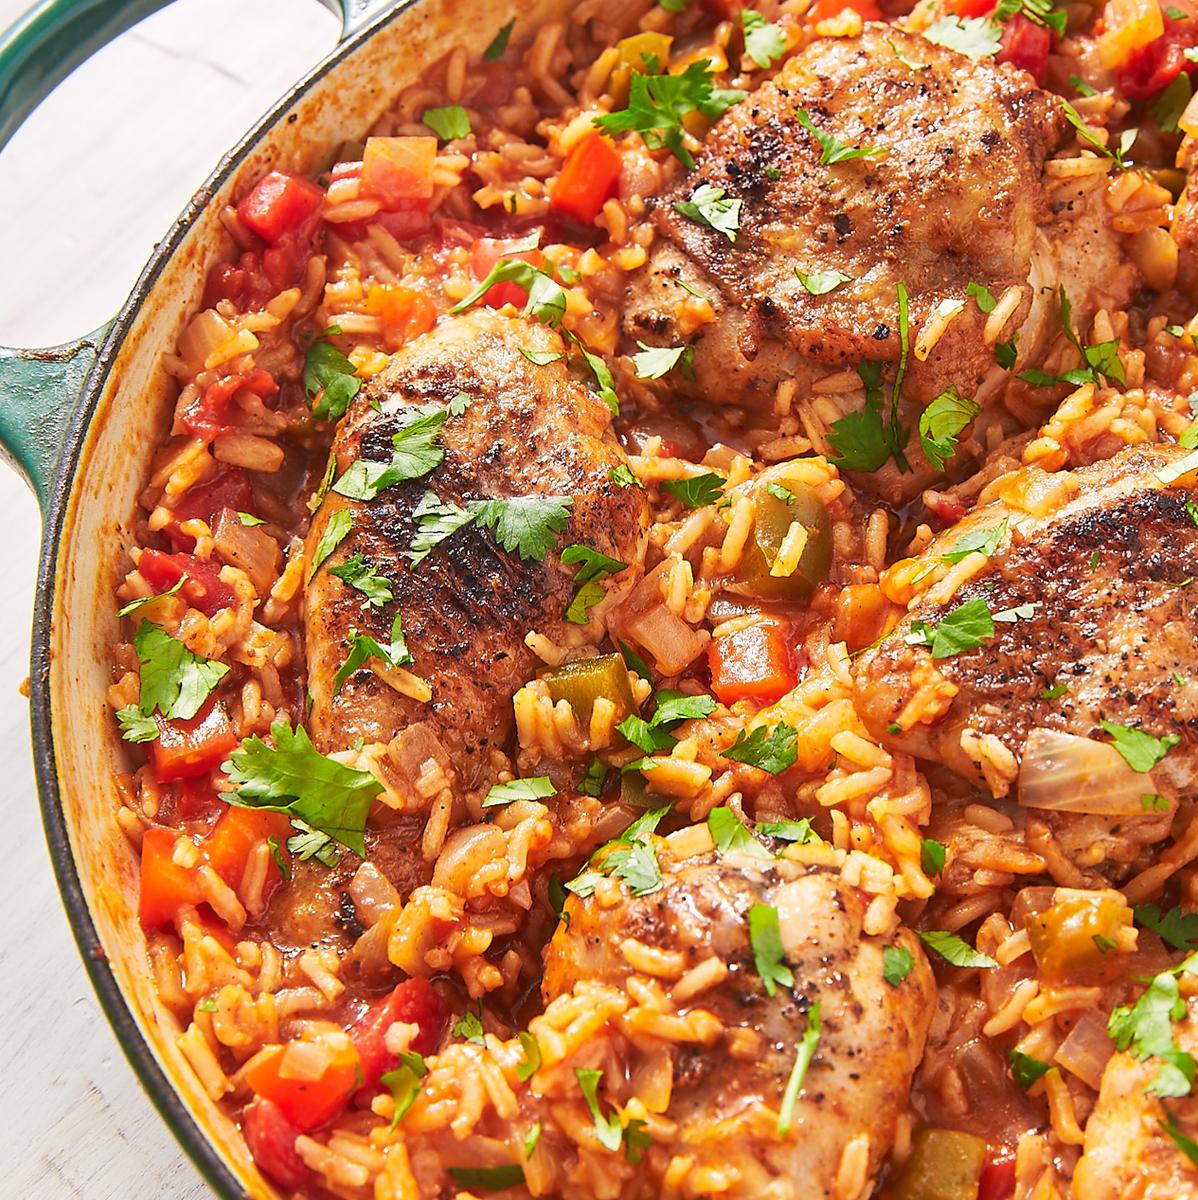  Upgrade your dinner game with this healthy Arroz Con Pollo recipe